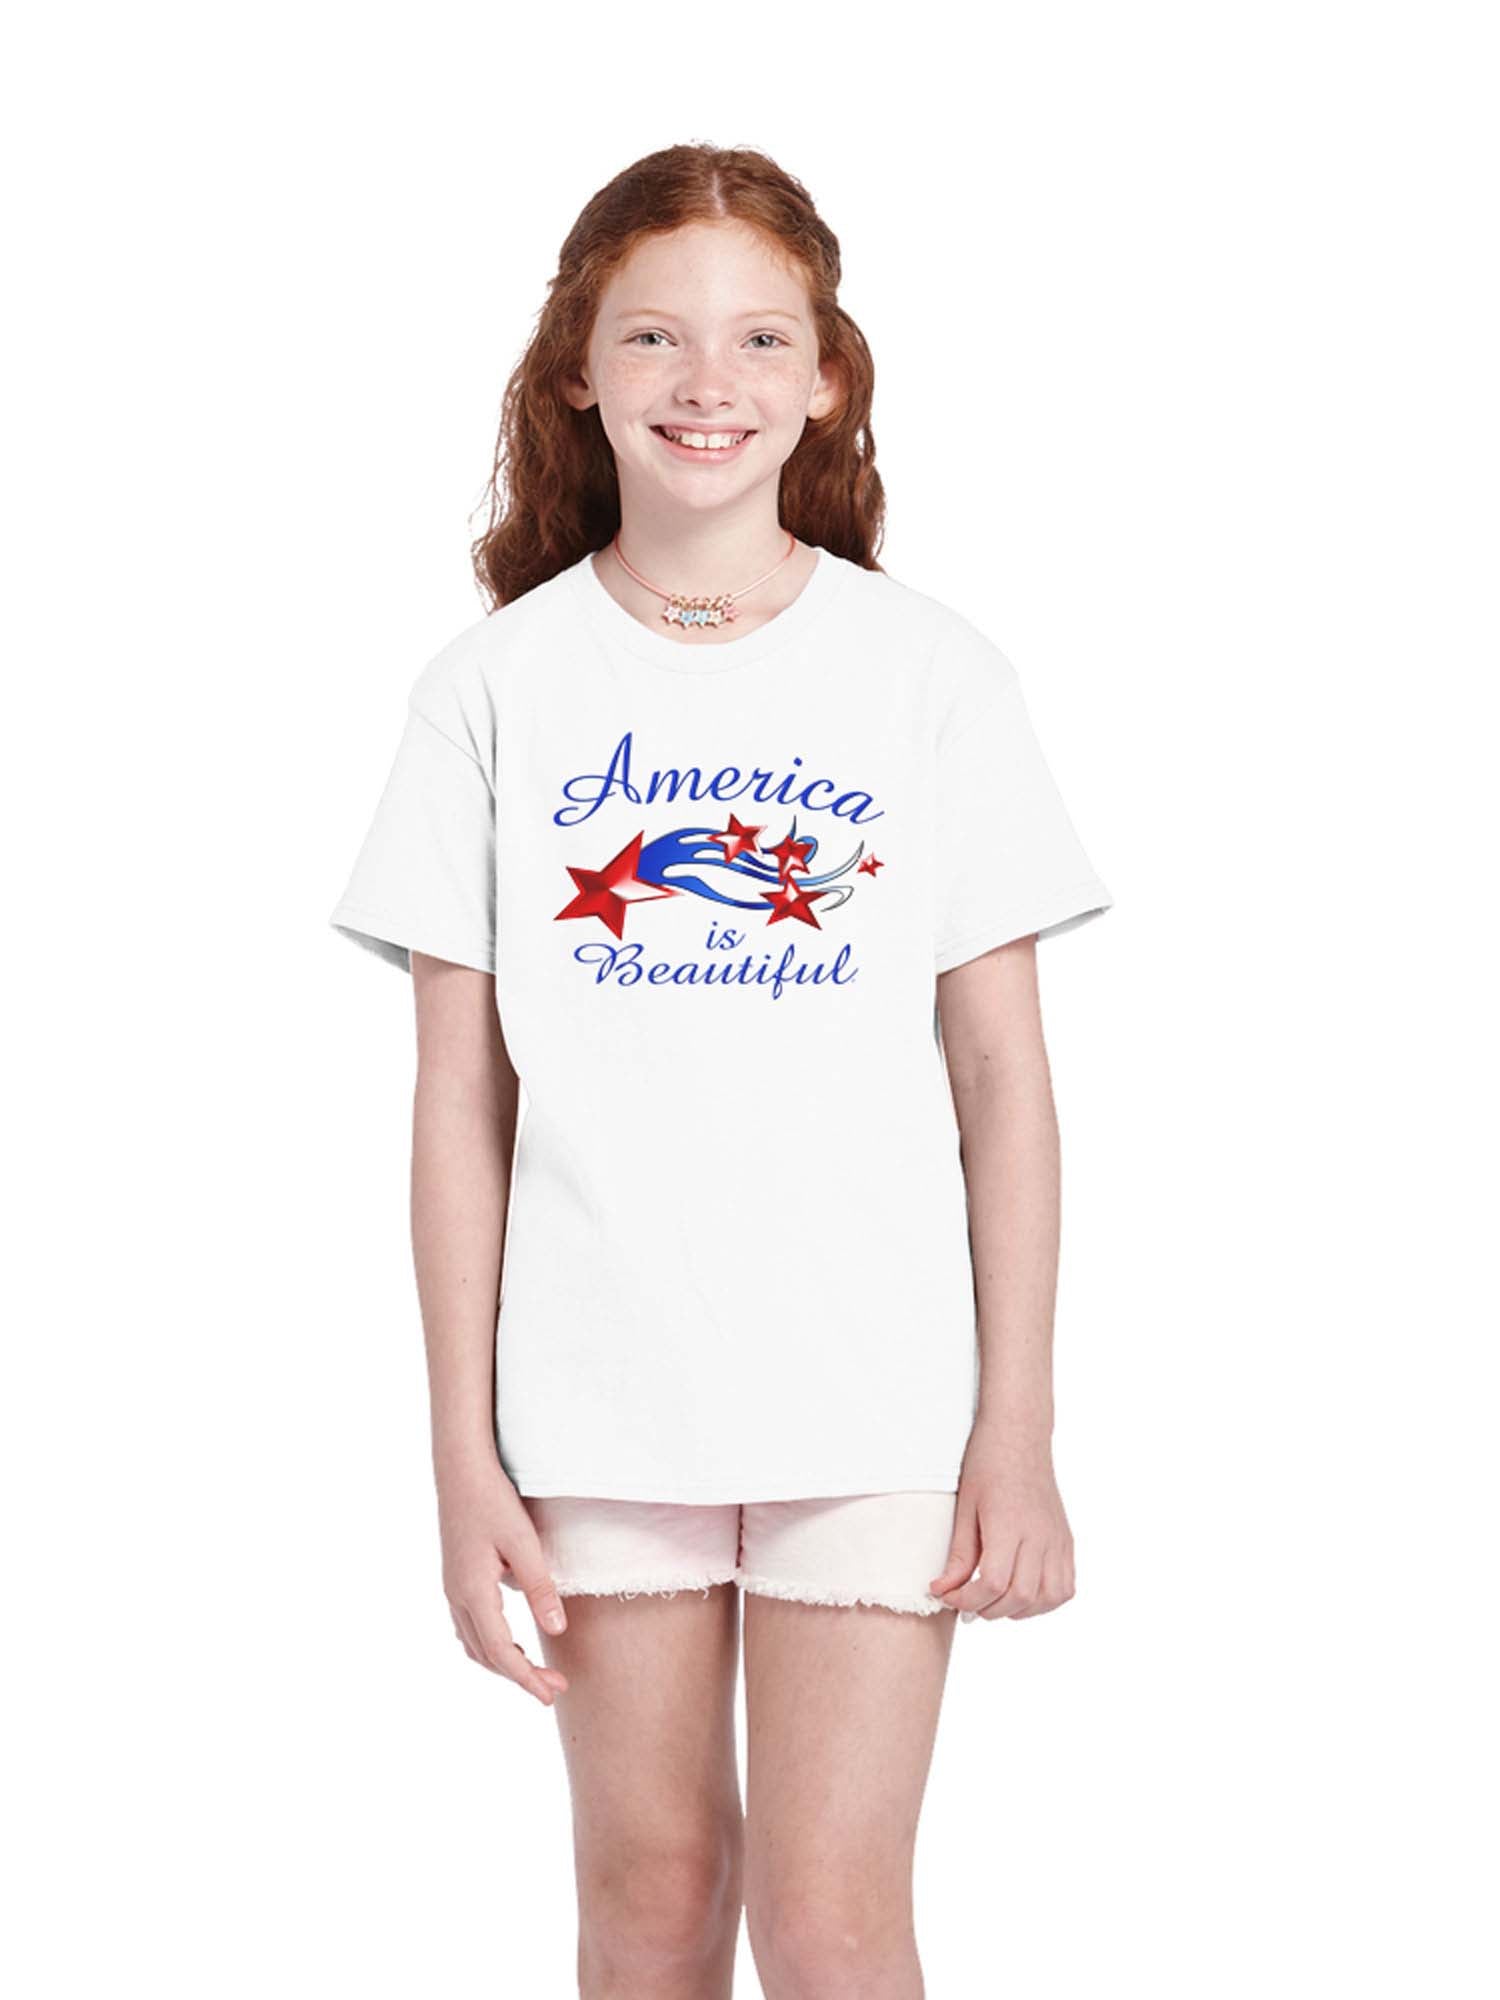 Shooting Stars Girl's Youth Abstract American Flag Graphic Tee by America The Beautiful